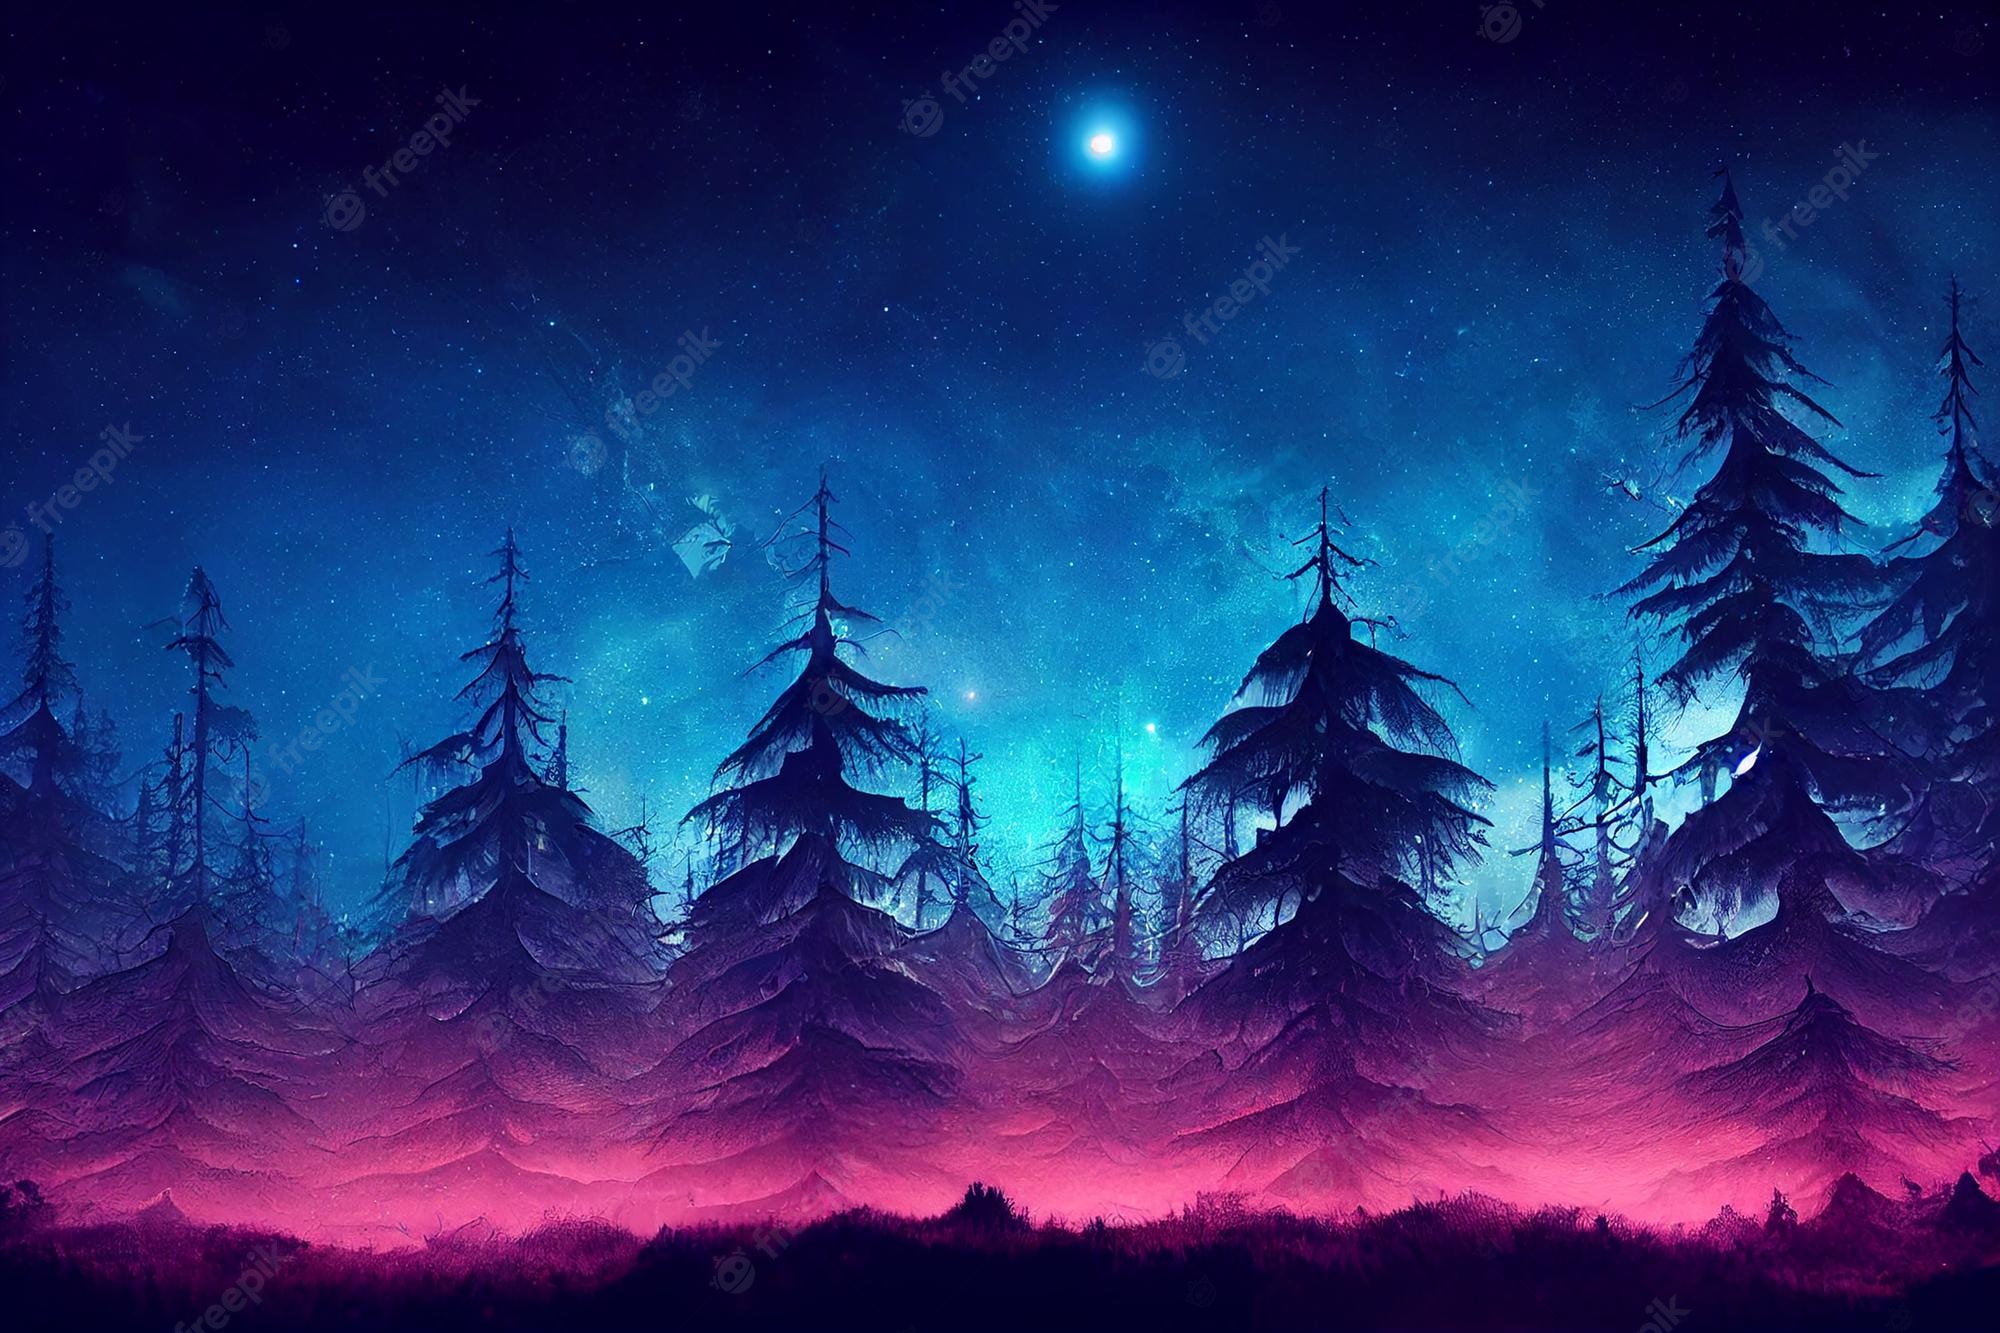 1500 Night Forest Pictures  Download Free Images on Unsplash